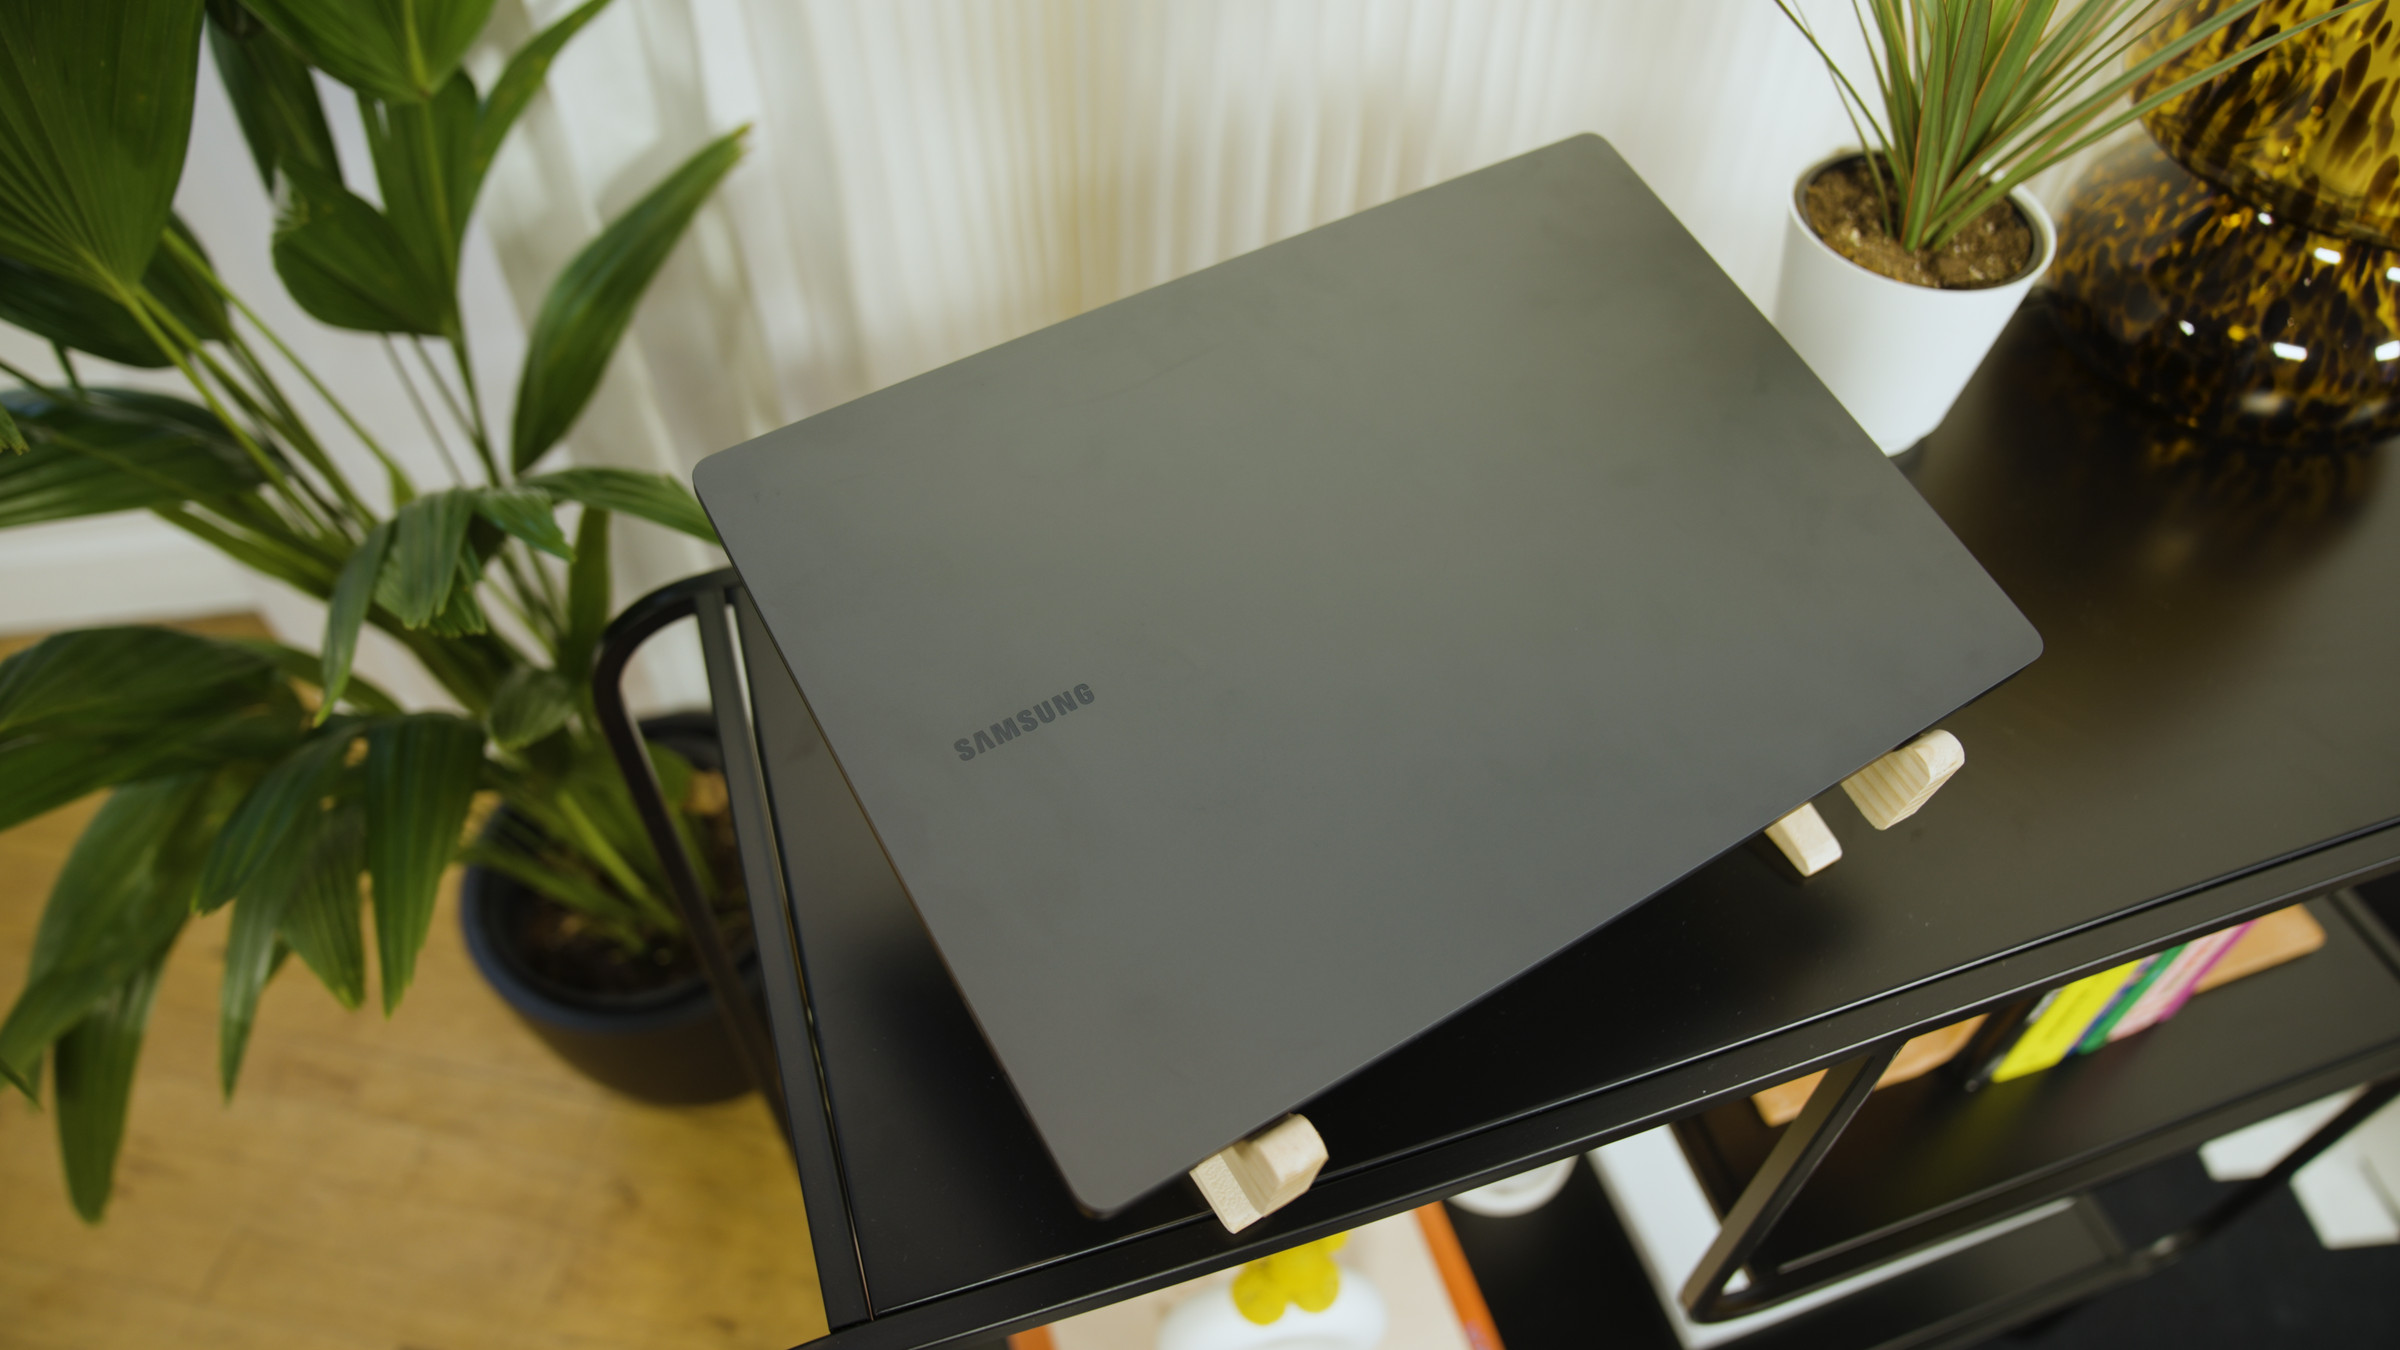 The Samsung Galaxy Book 3 Ultra lid seen from above with houseplants on either side.